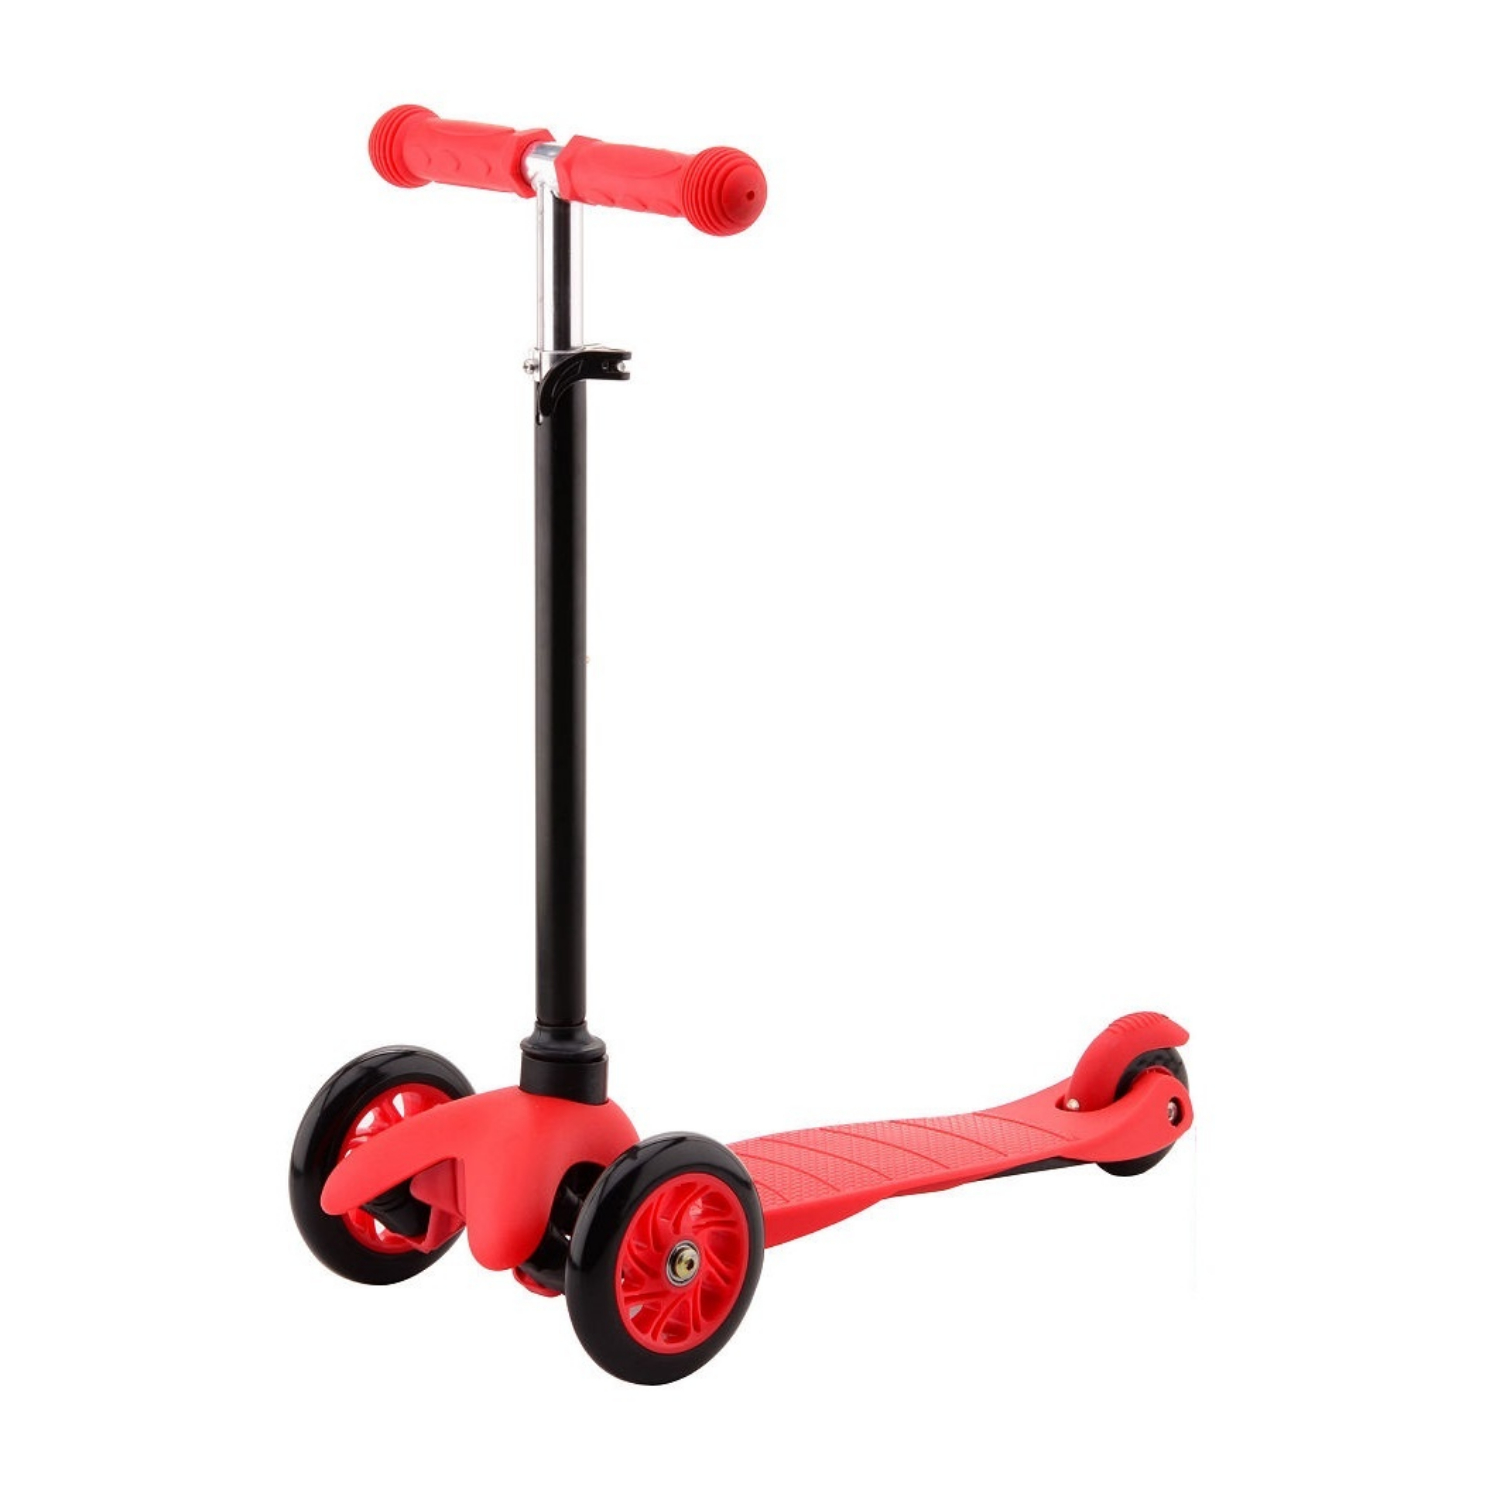 STEP SCOOTER DRIEWIEL ROOD - 702 0263 - 504277